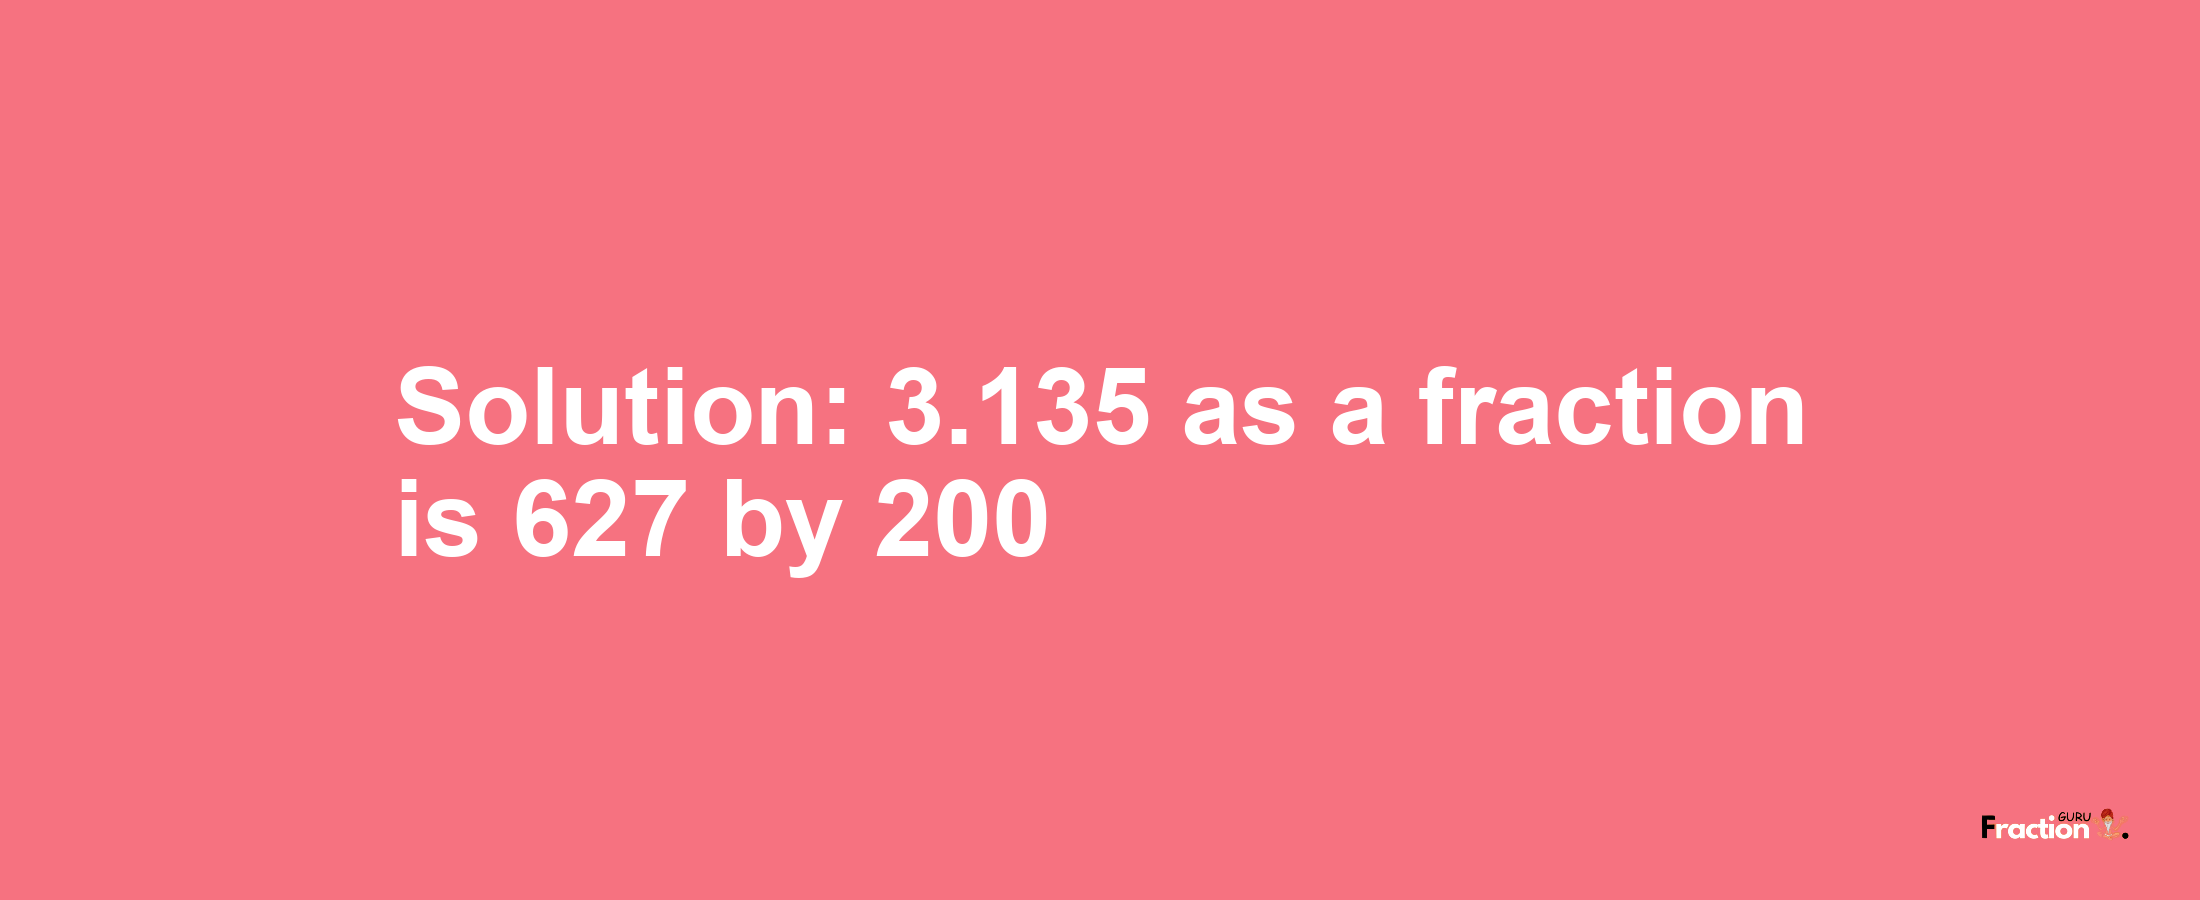 Solution:3.135 as a fraction is 627/200